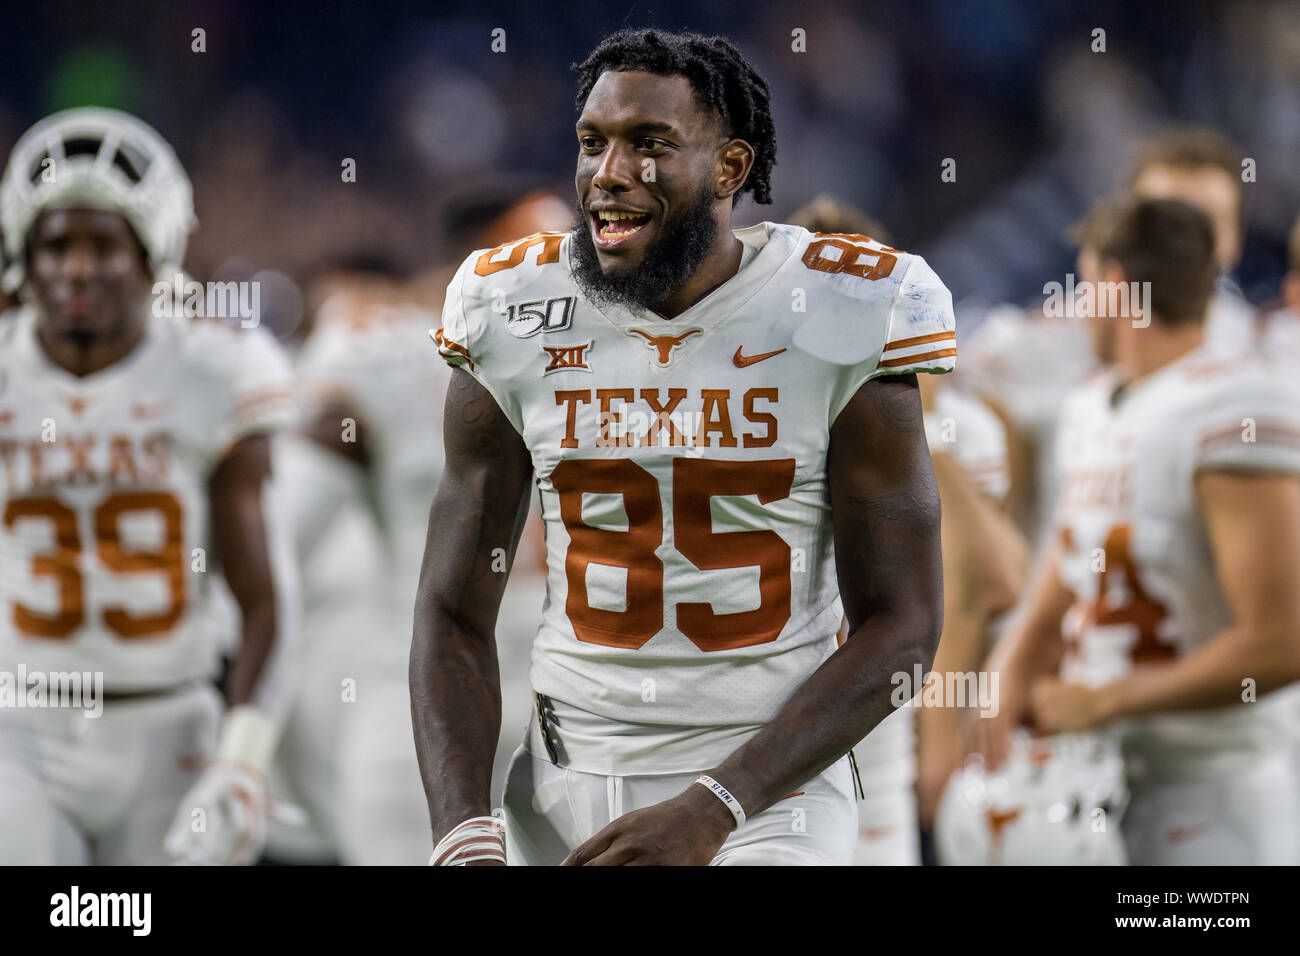 Houston, TX, USA. 14th Sep, 2019. Texas Longhorns wide receiver Malcolm Epps (85) after an NCAA football game between the Texas Longhorns and the Rice Owls at NRG Stadium in Houston, TX. Texas won the game 48 to 13.Trask Smith/CSM/Alamy Live News Stock Photo